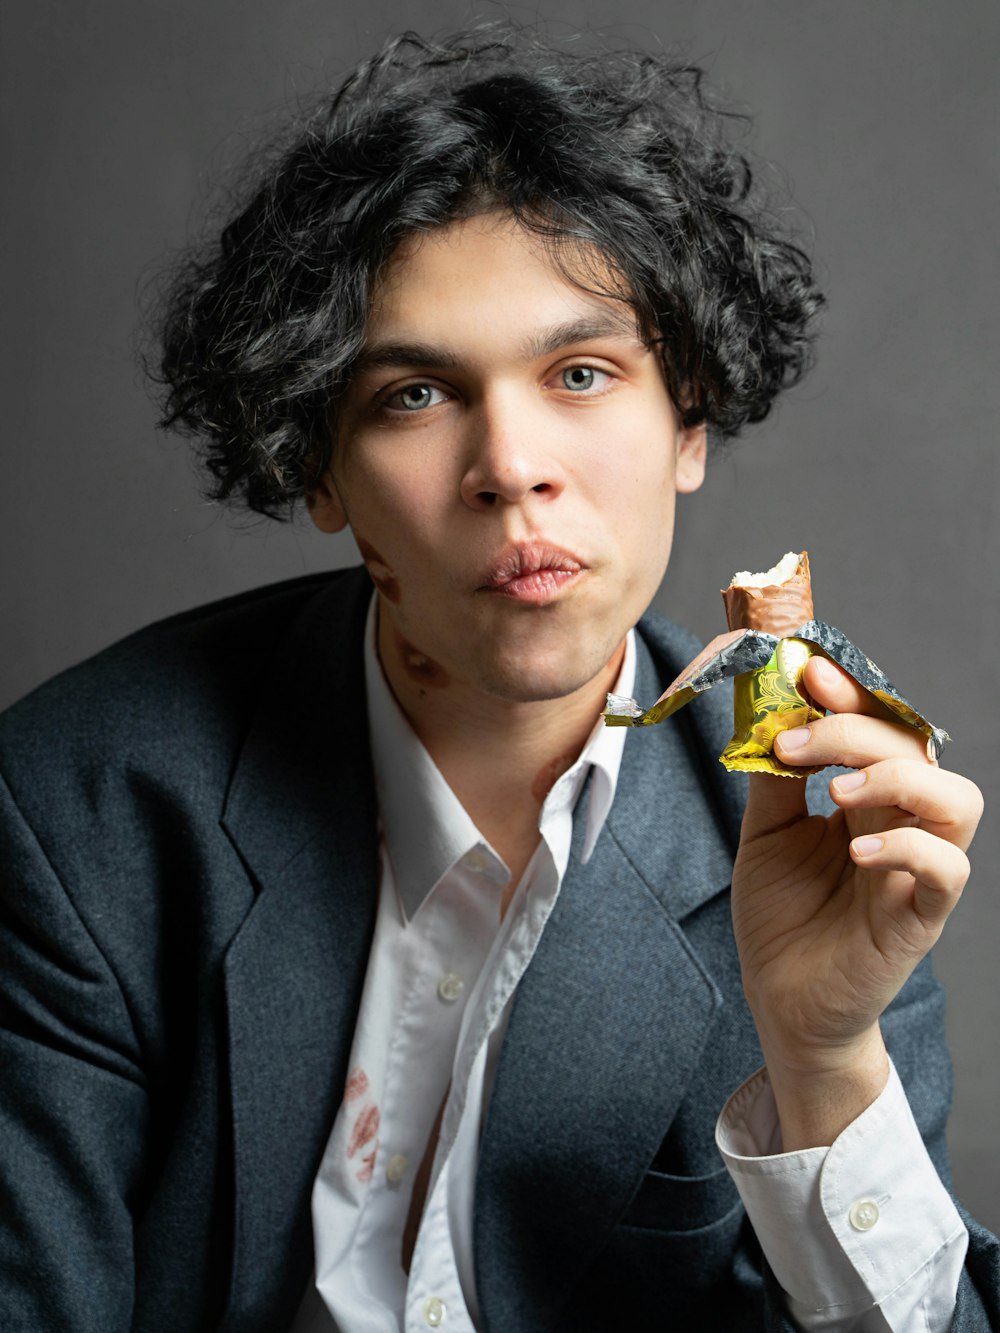 a man in a suit eating a piece of food